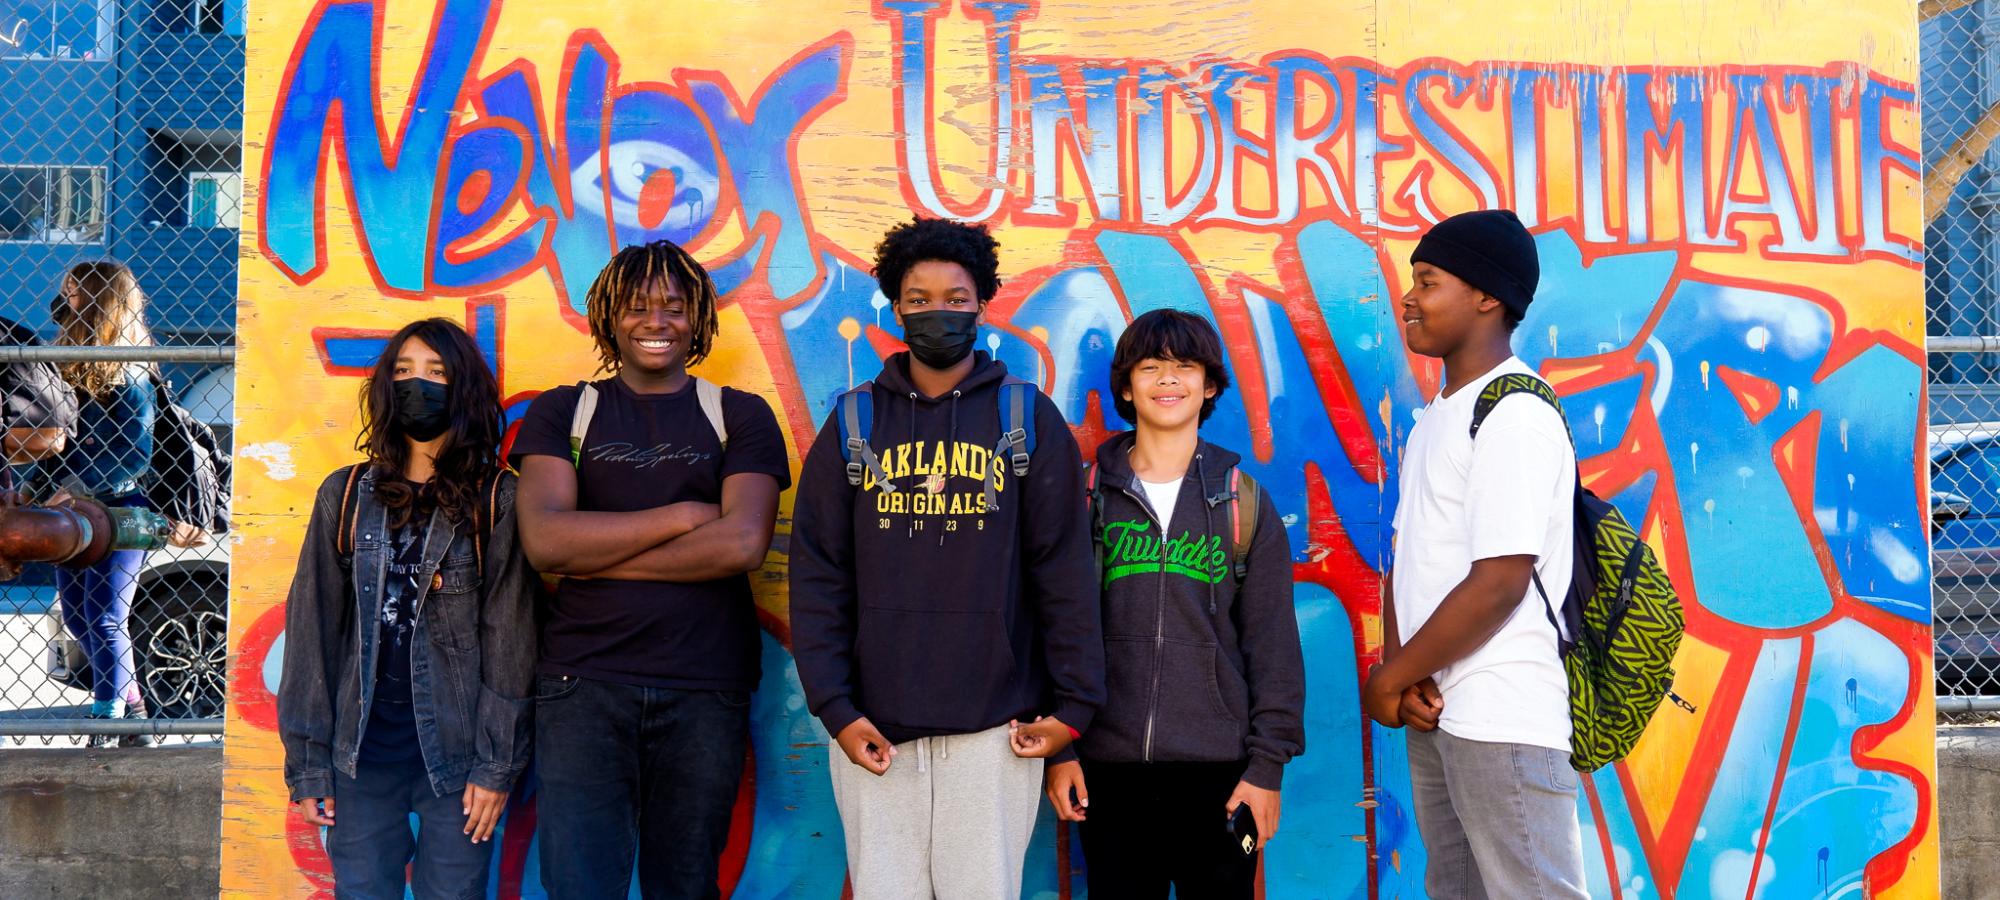 Students pose in front of a mural